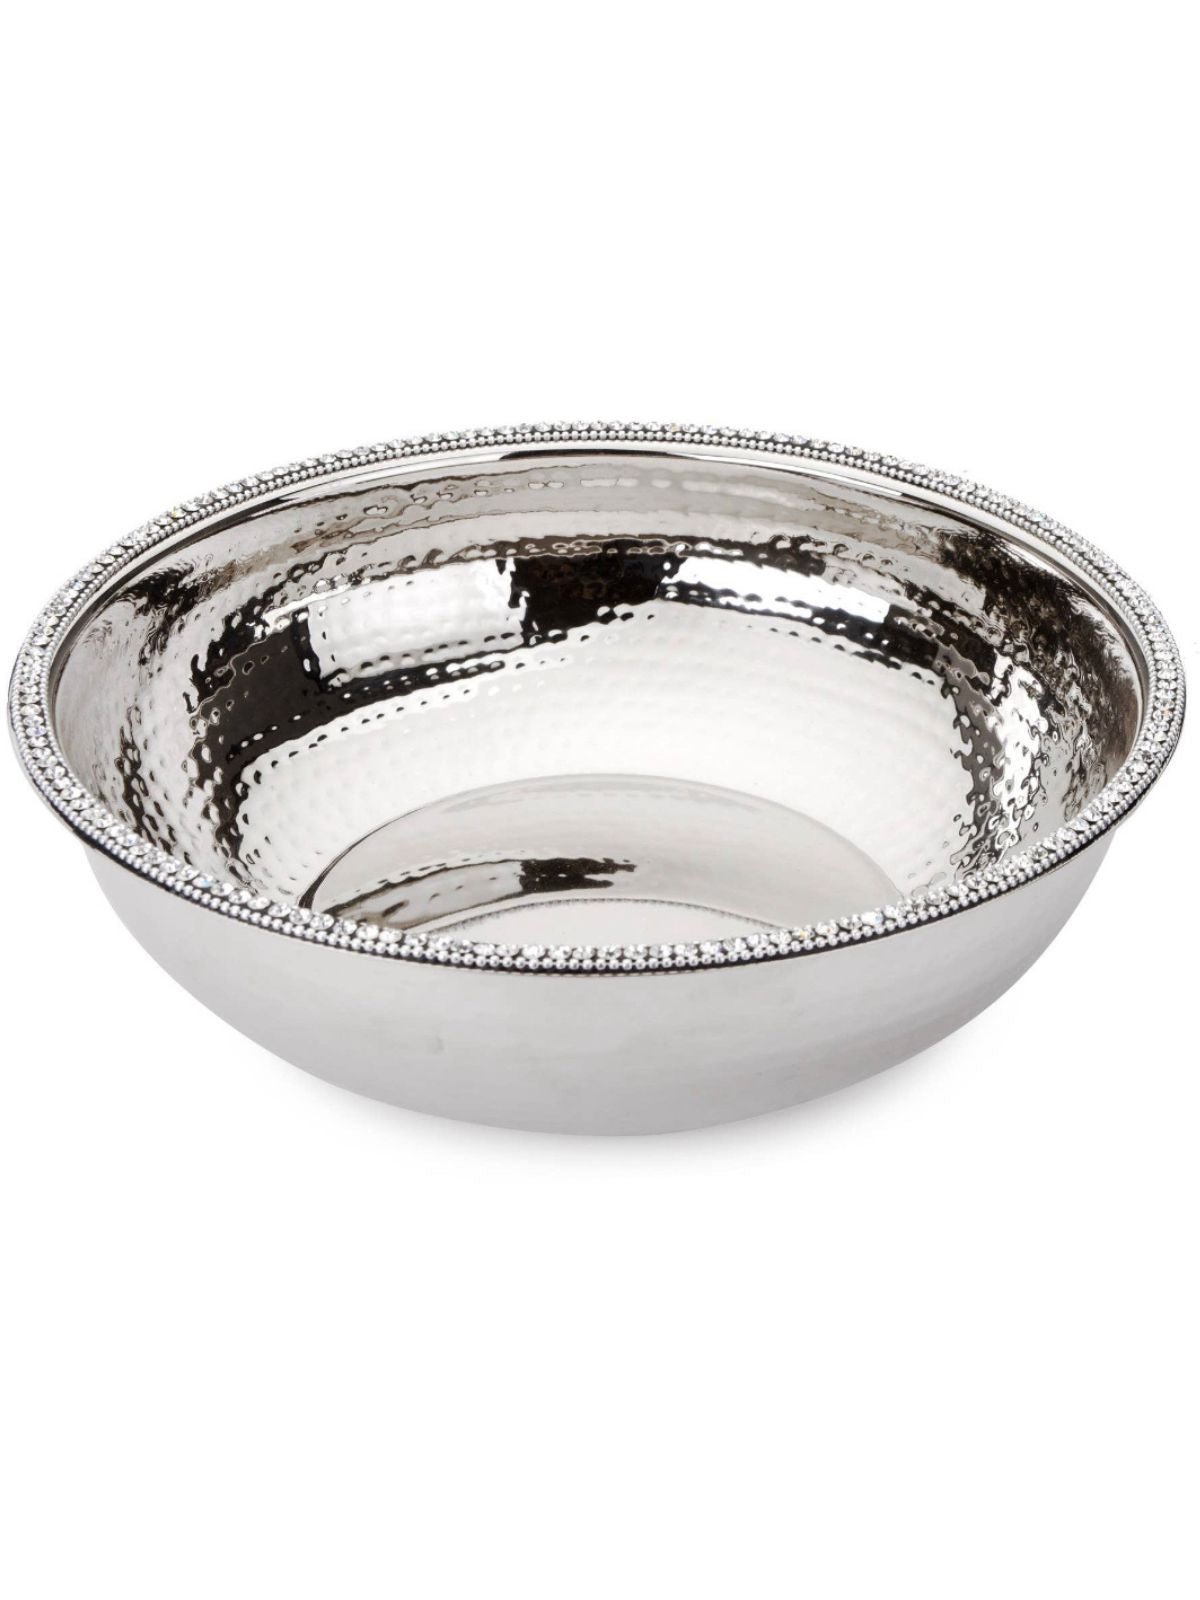 Stainless Steel Bowl with Diamond Details, Measure 10.75D x 3H.